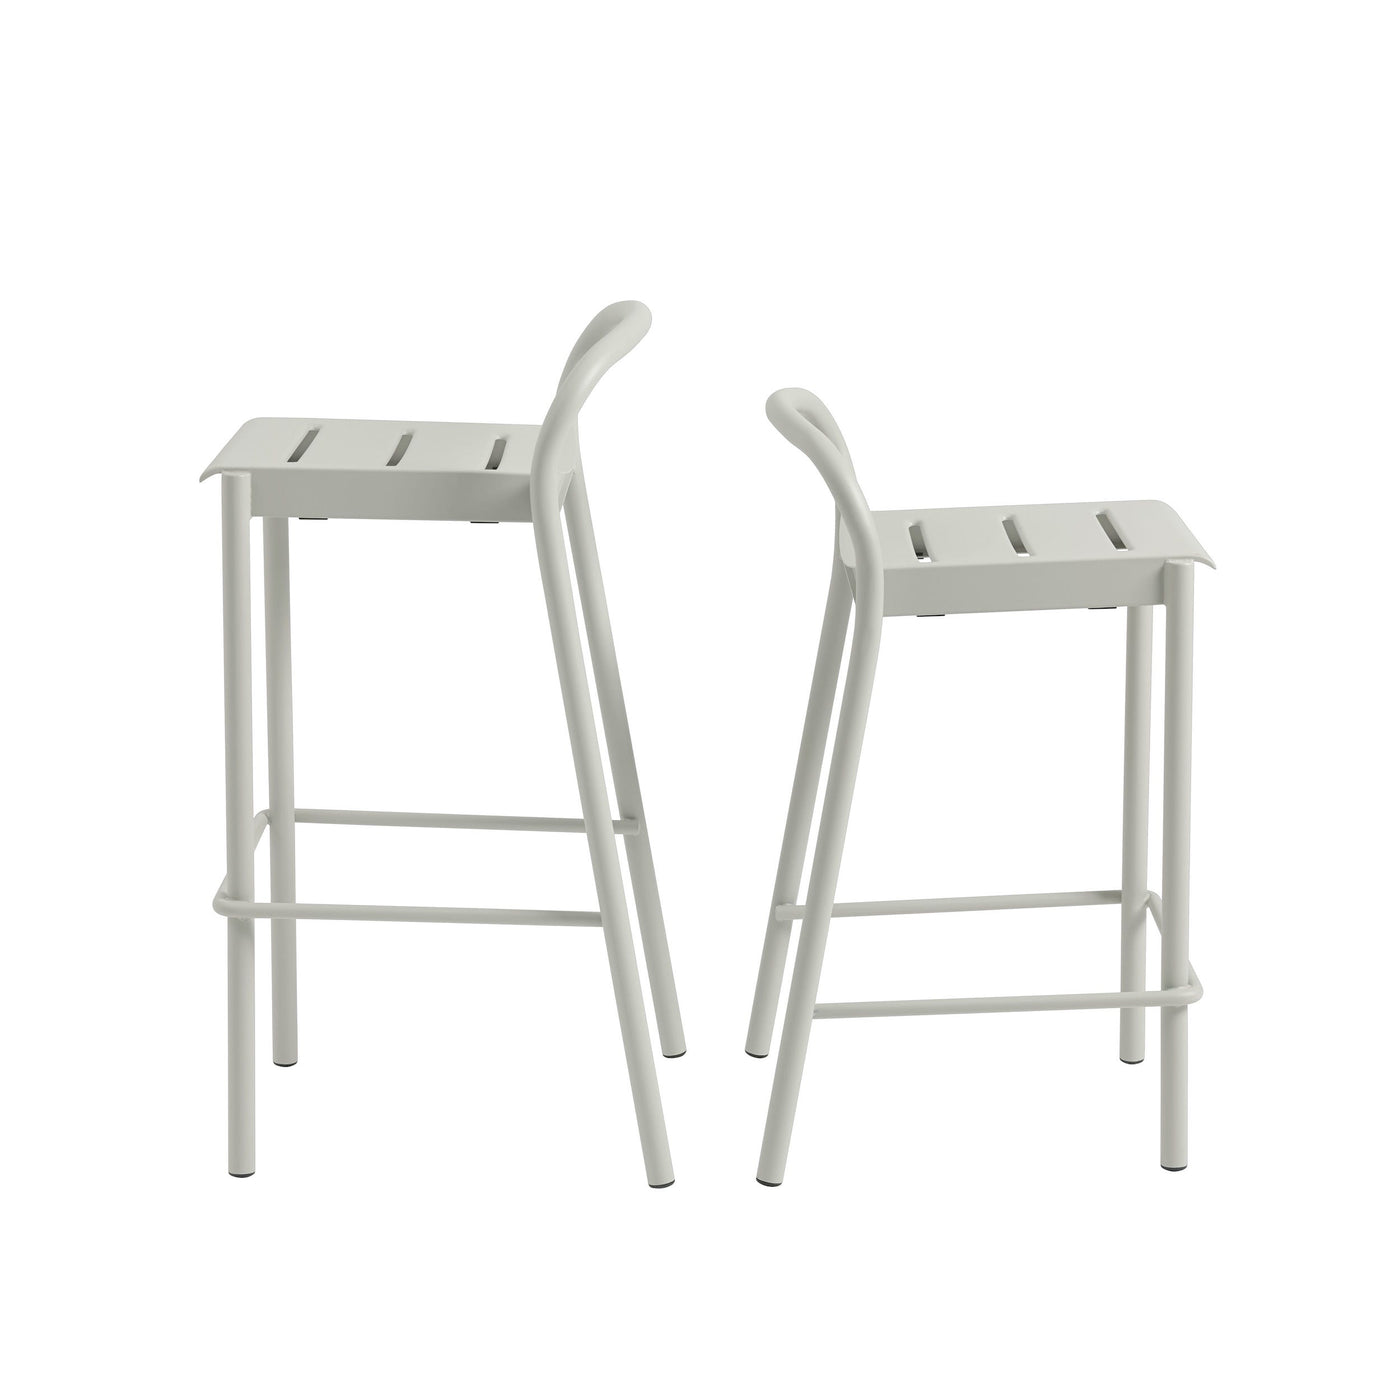 Muuto Linear Steel Bar Stool. Shop outdoor furniture at someday designs. #colour_grey